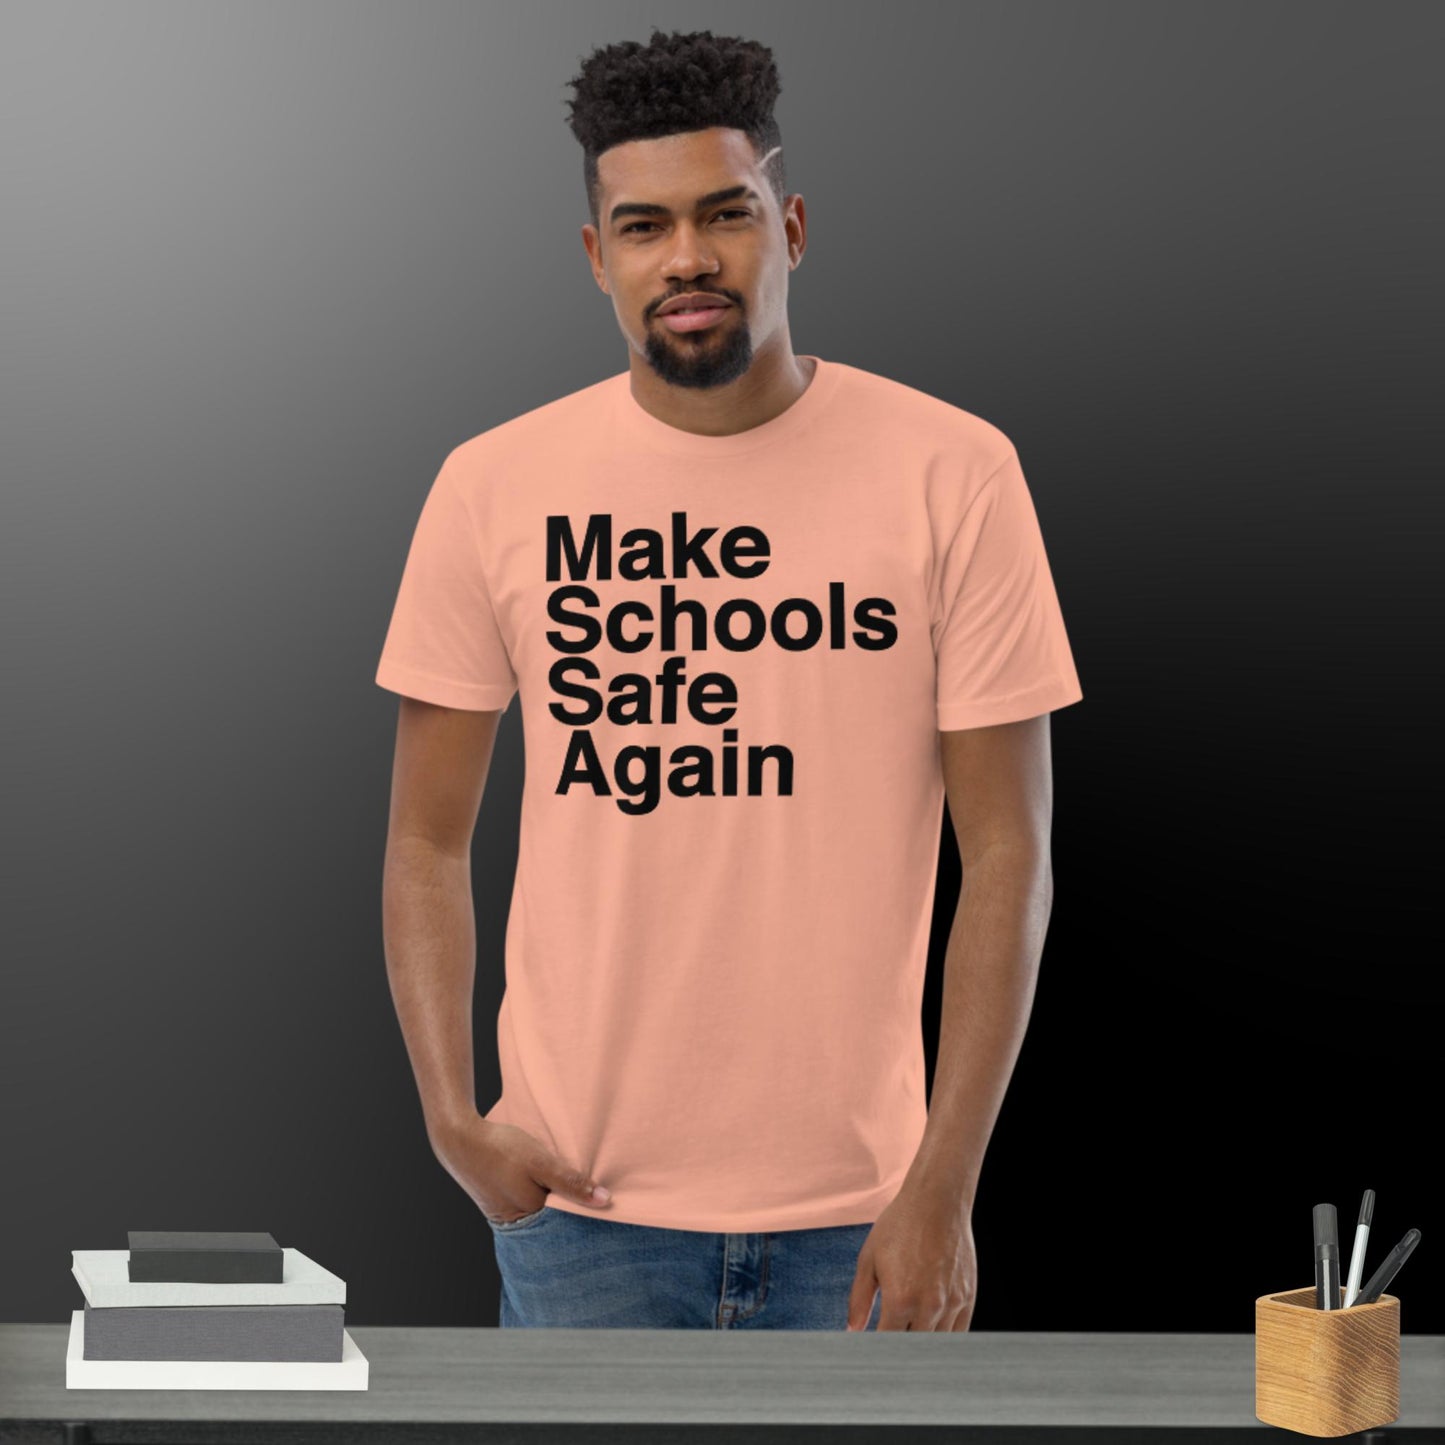 Men's Fitted Make Schools Safe Again Tee